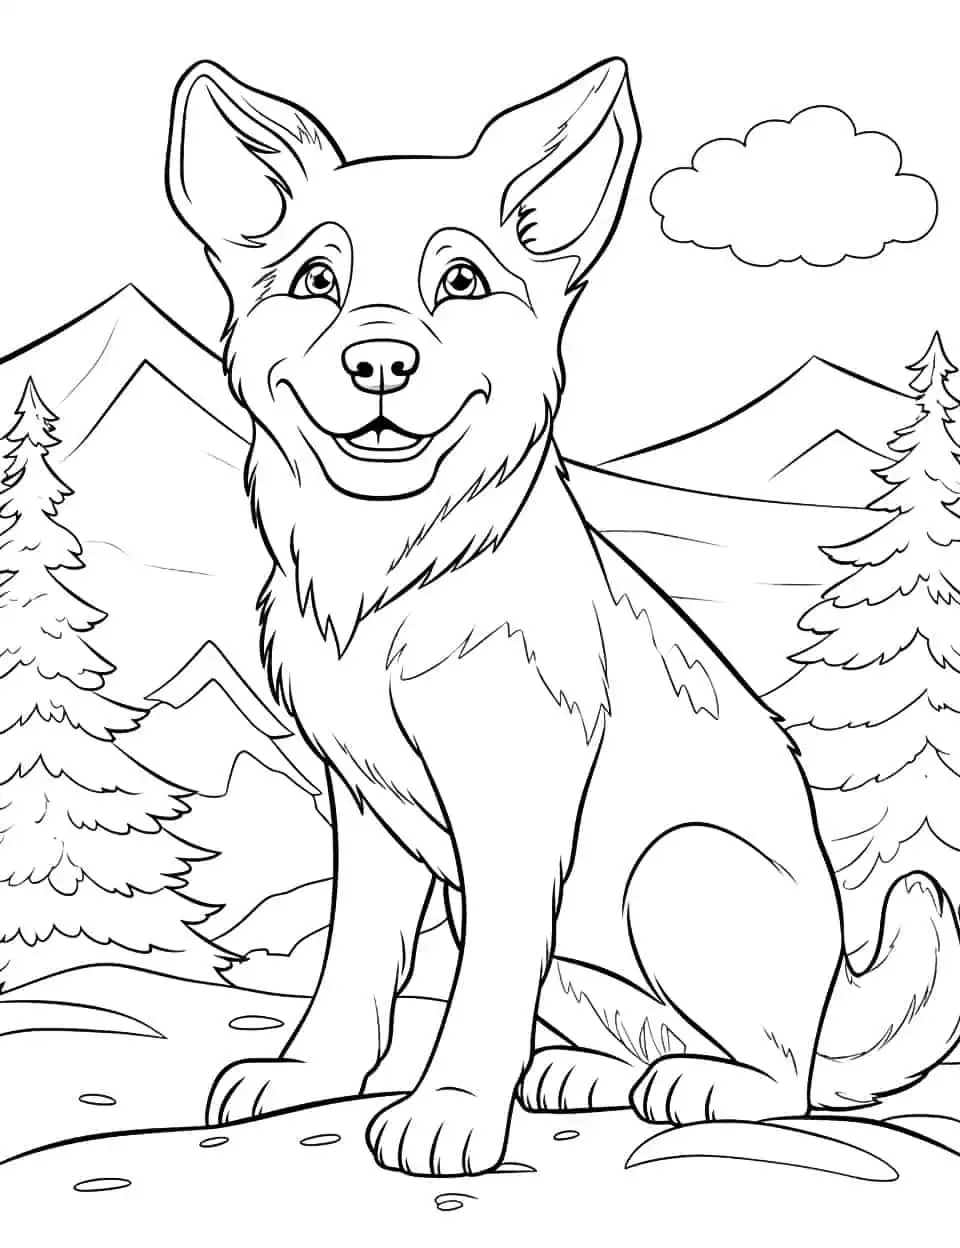 Husky in the Snow Coloring Page - A beautiful Husky sitting in the snow, with snow-covered pine trees in the background.